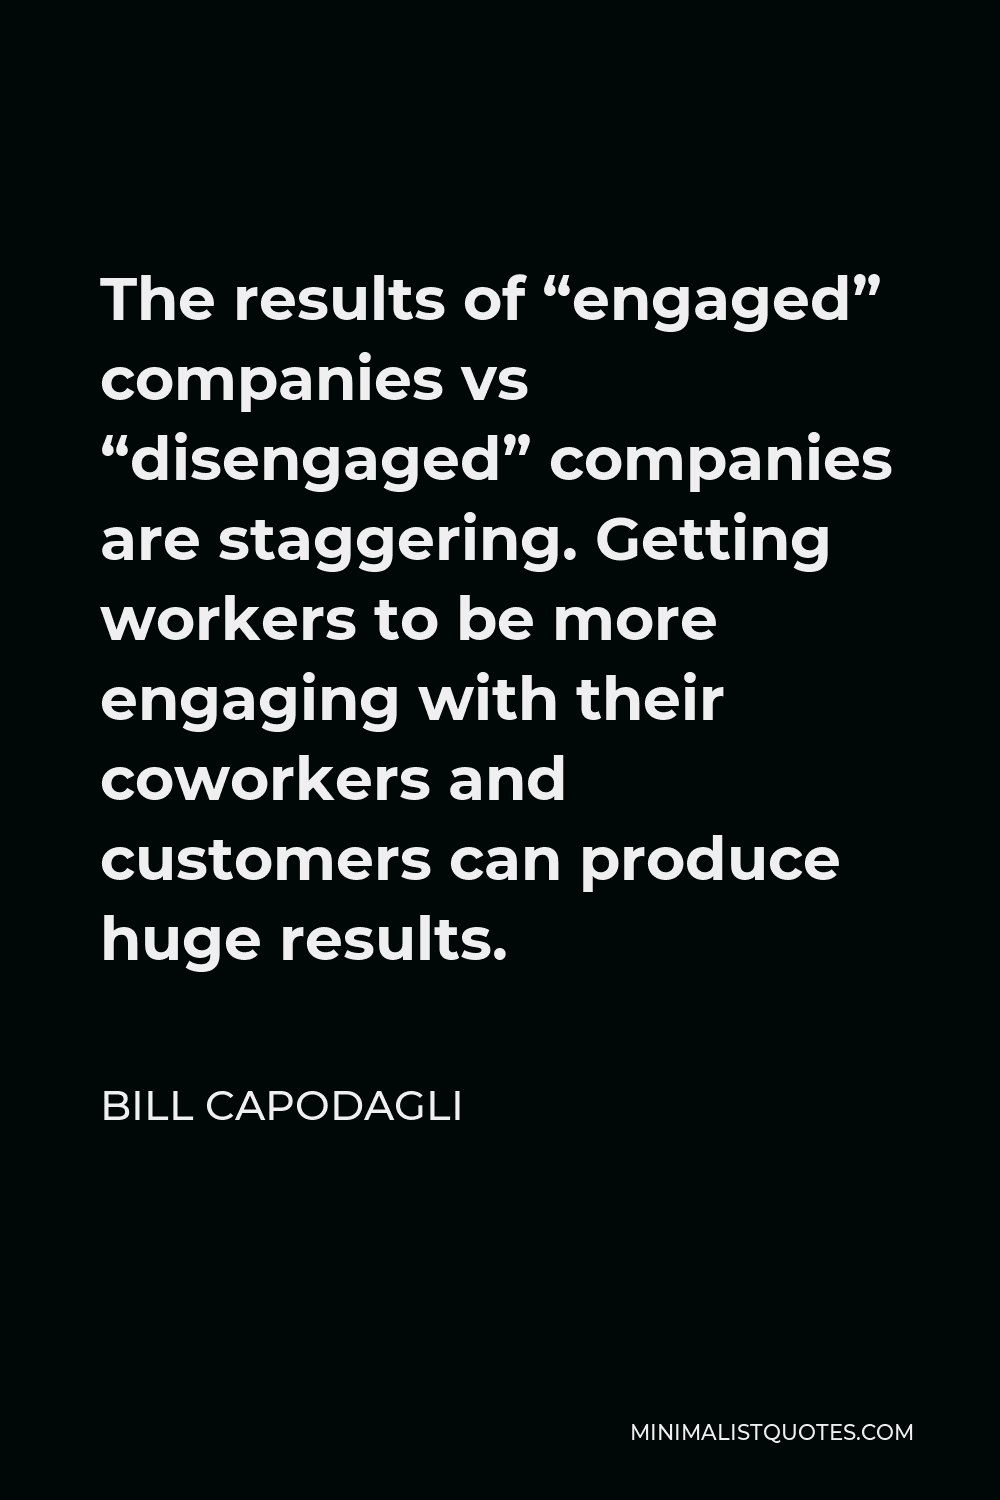 Bill Capodagli Quote - The results of “engaged” companies vs “disengaged” companies are staggering. Getting workers to be more engaging with their coworkers and customers can produce huge results.